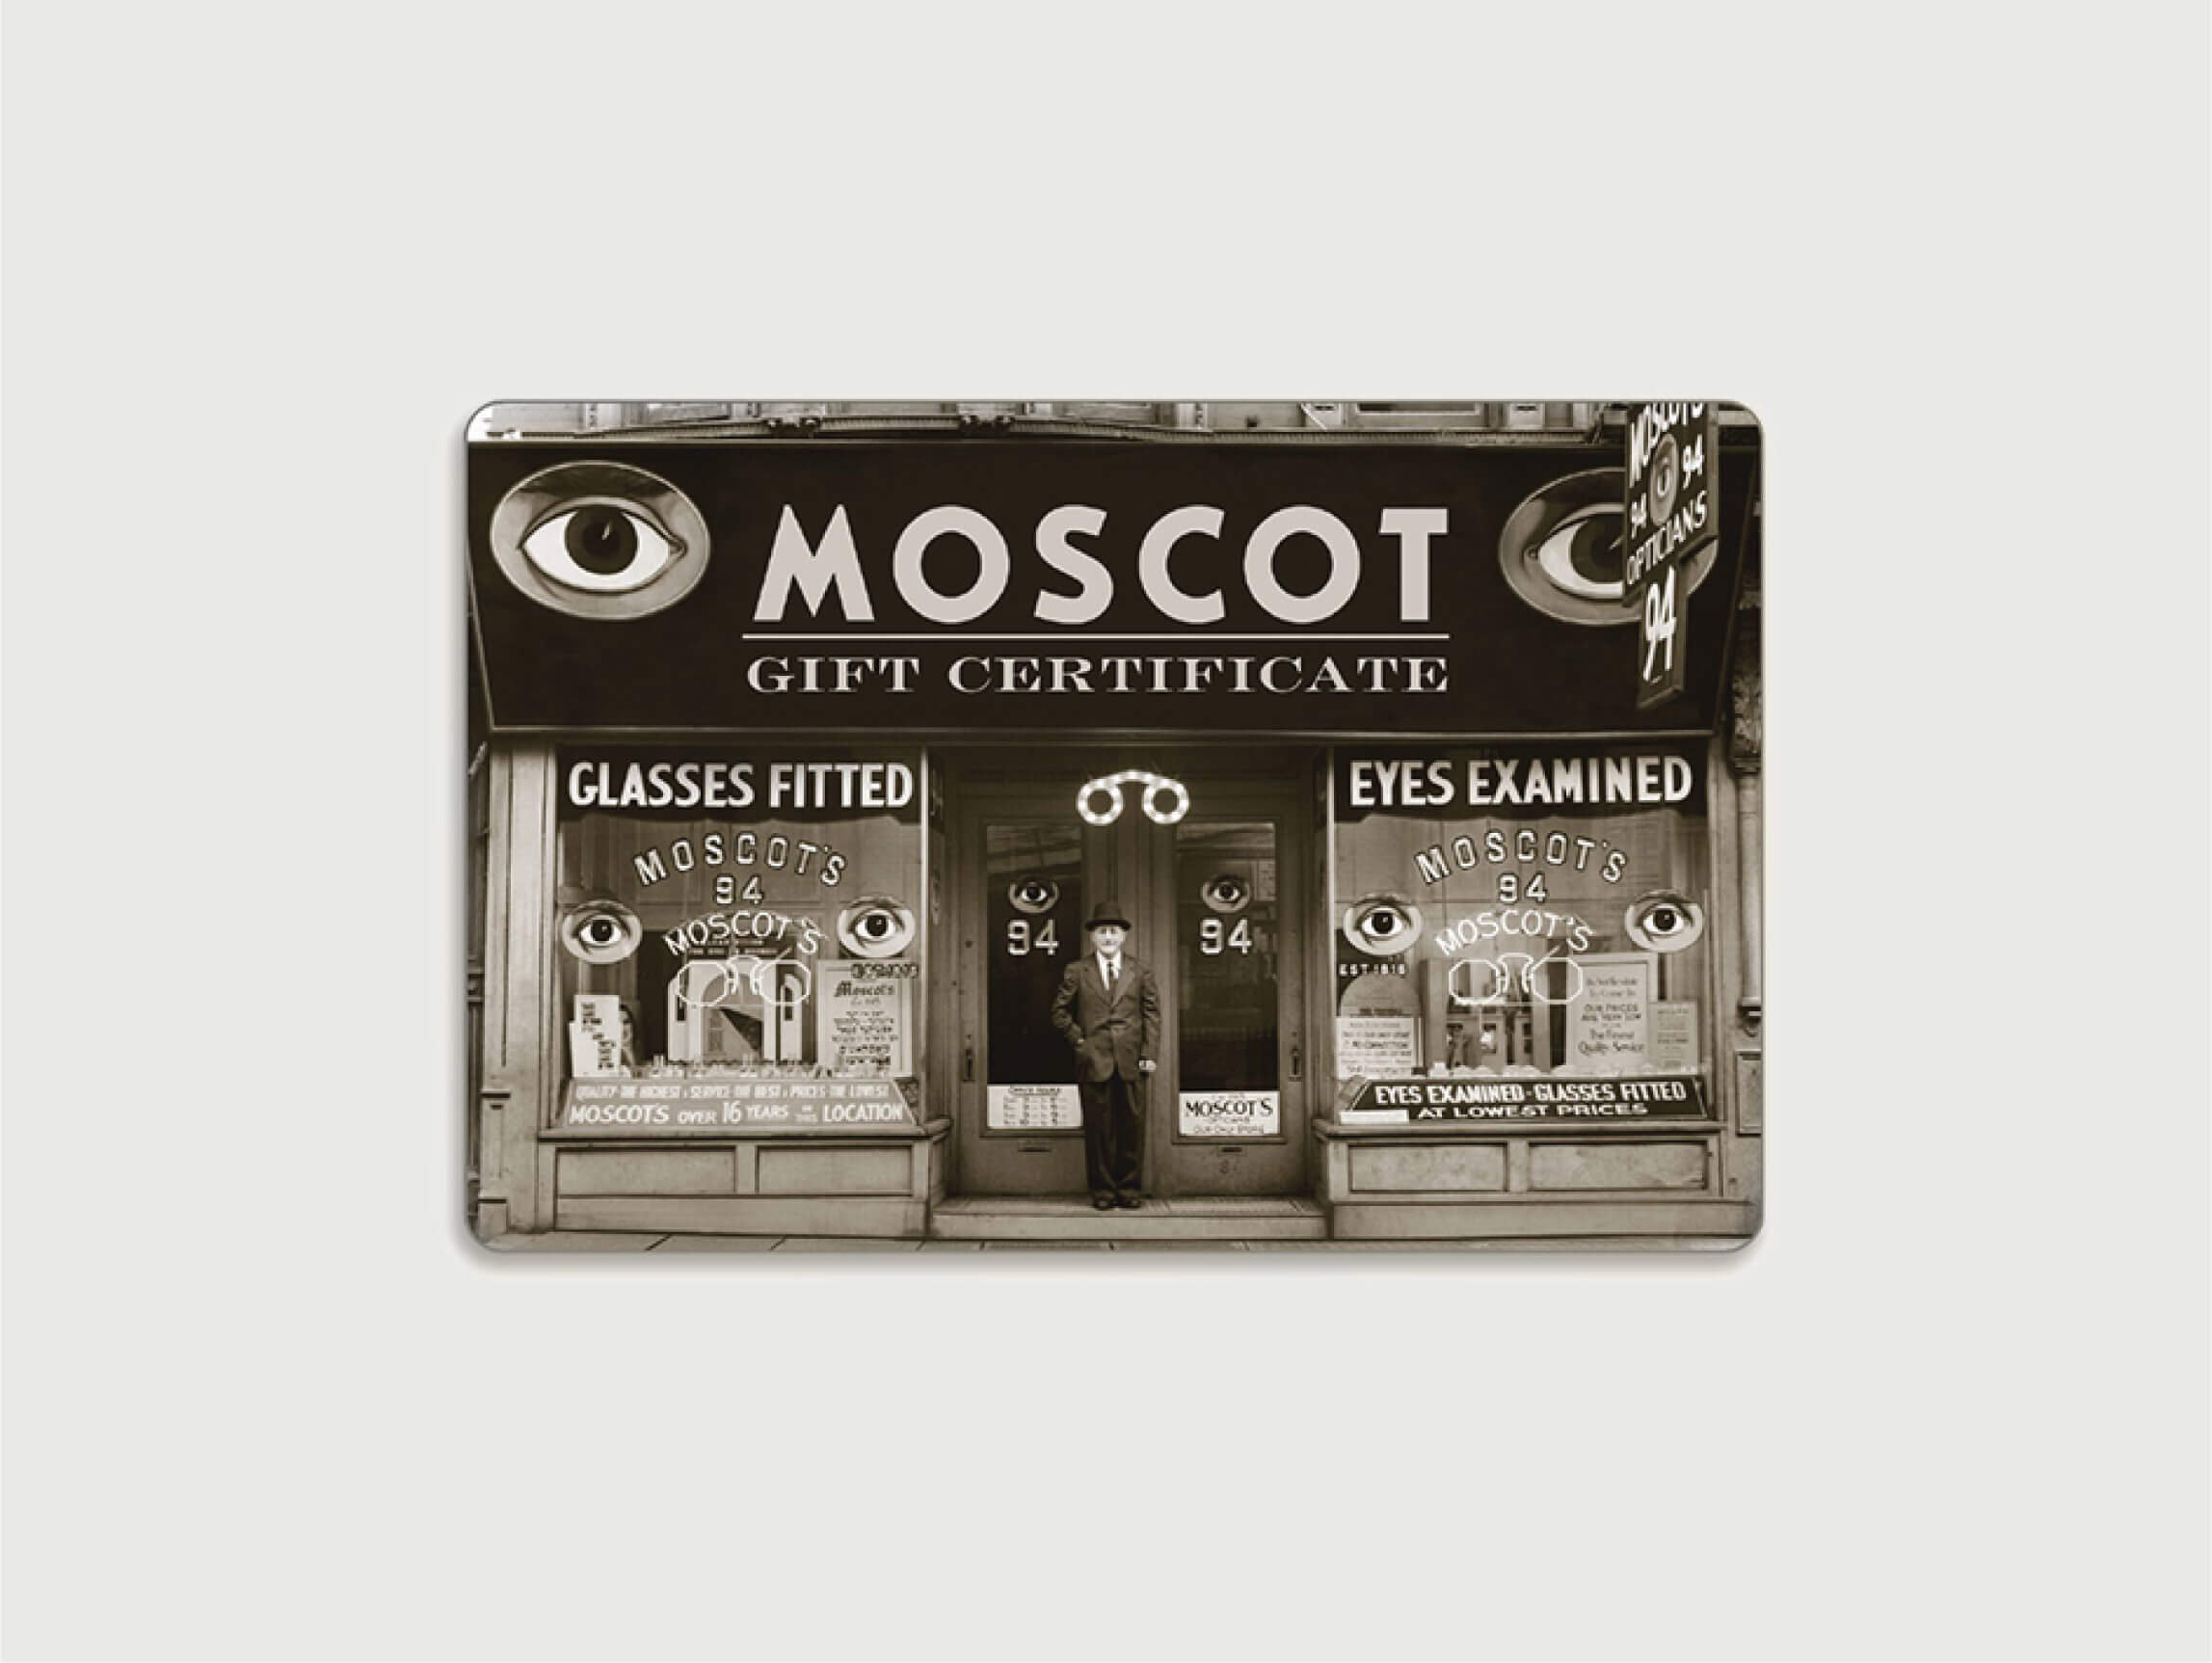 The MOSCOT Gift Card